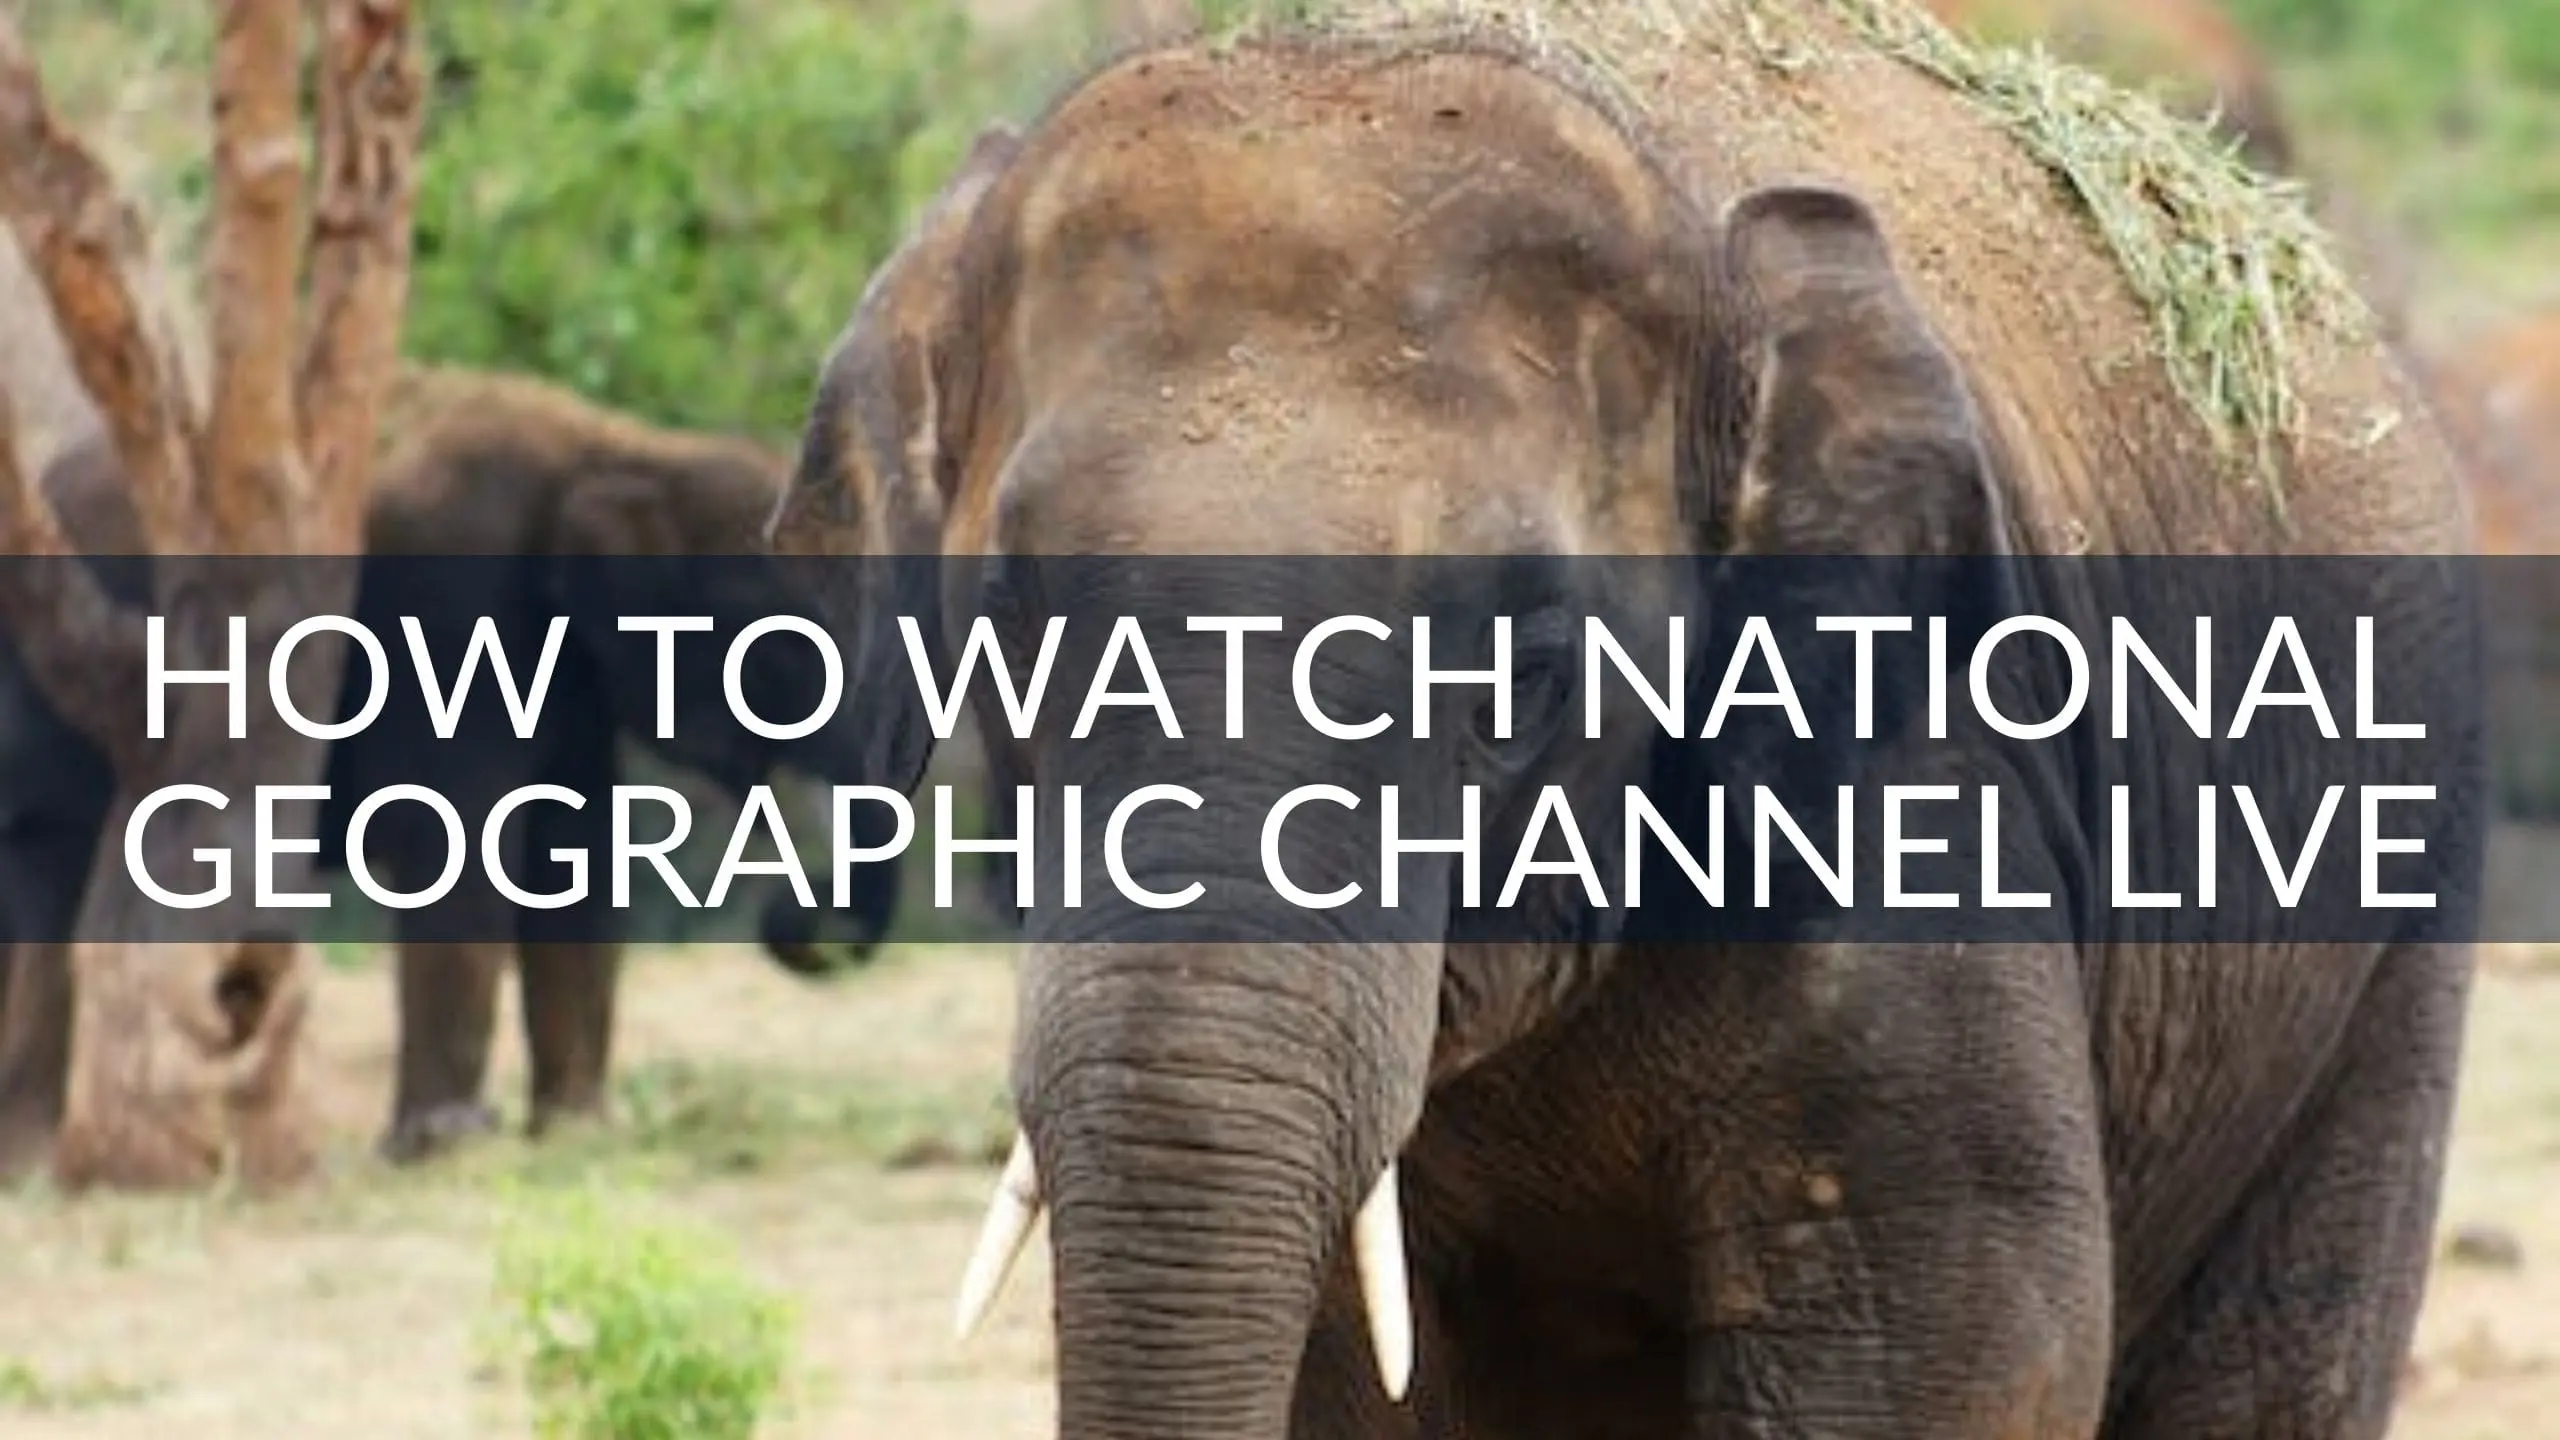 How to Watch National Geographic Channel Live with IPTV